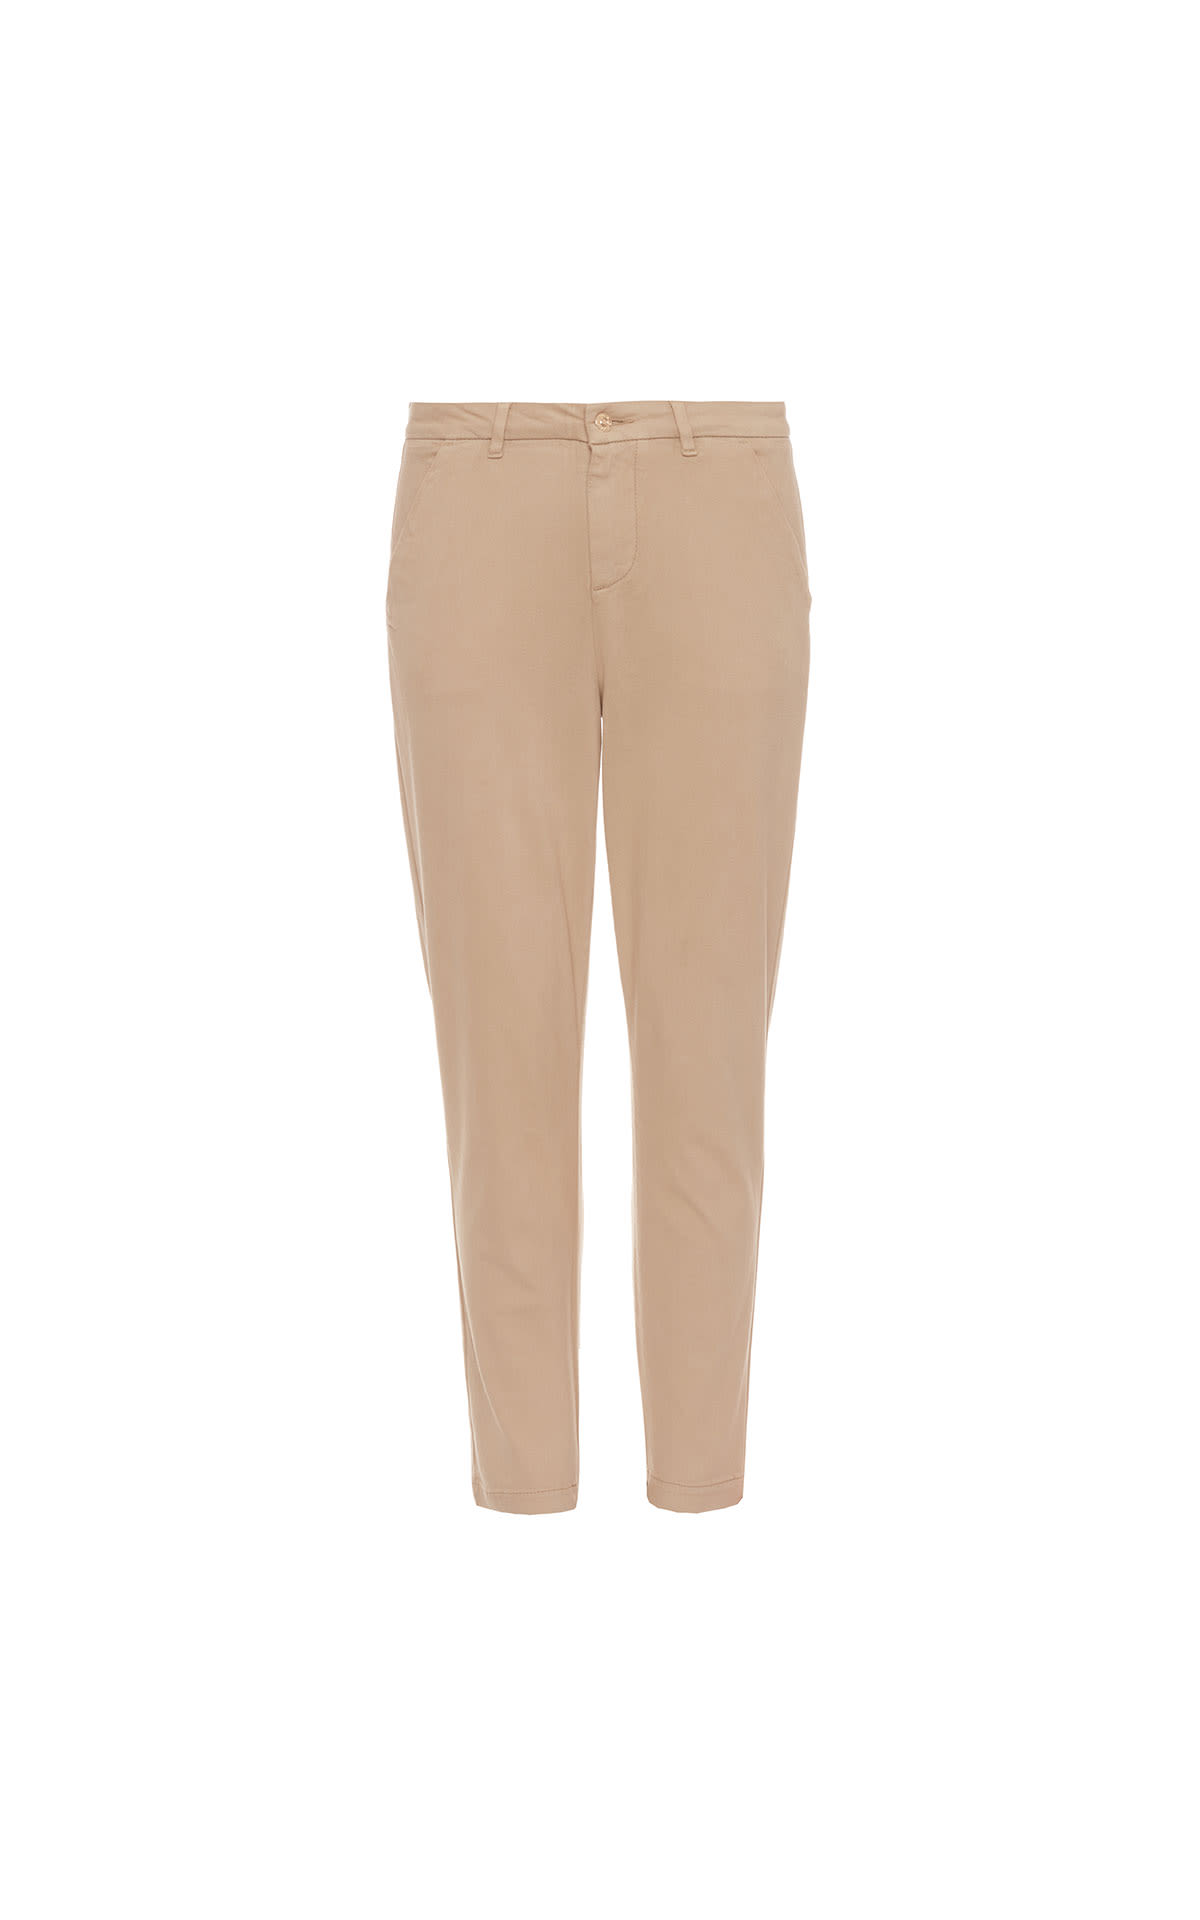 7 For all Mankind Regular fit trousers from Bicester Village